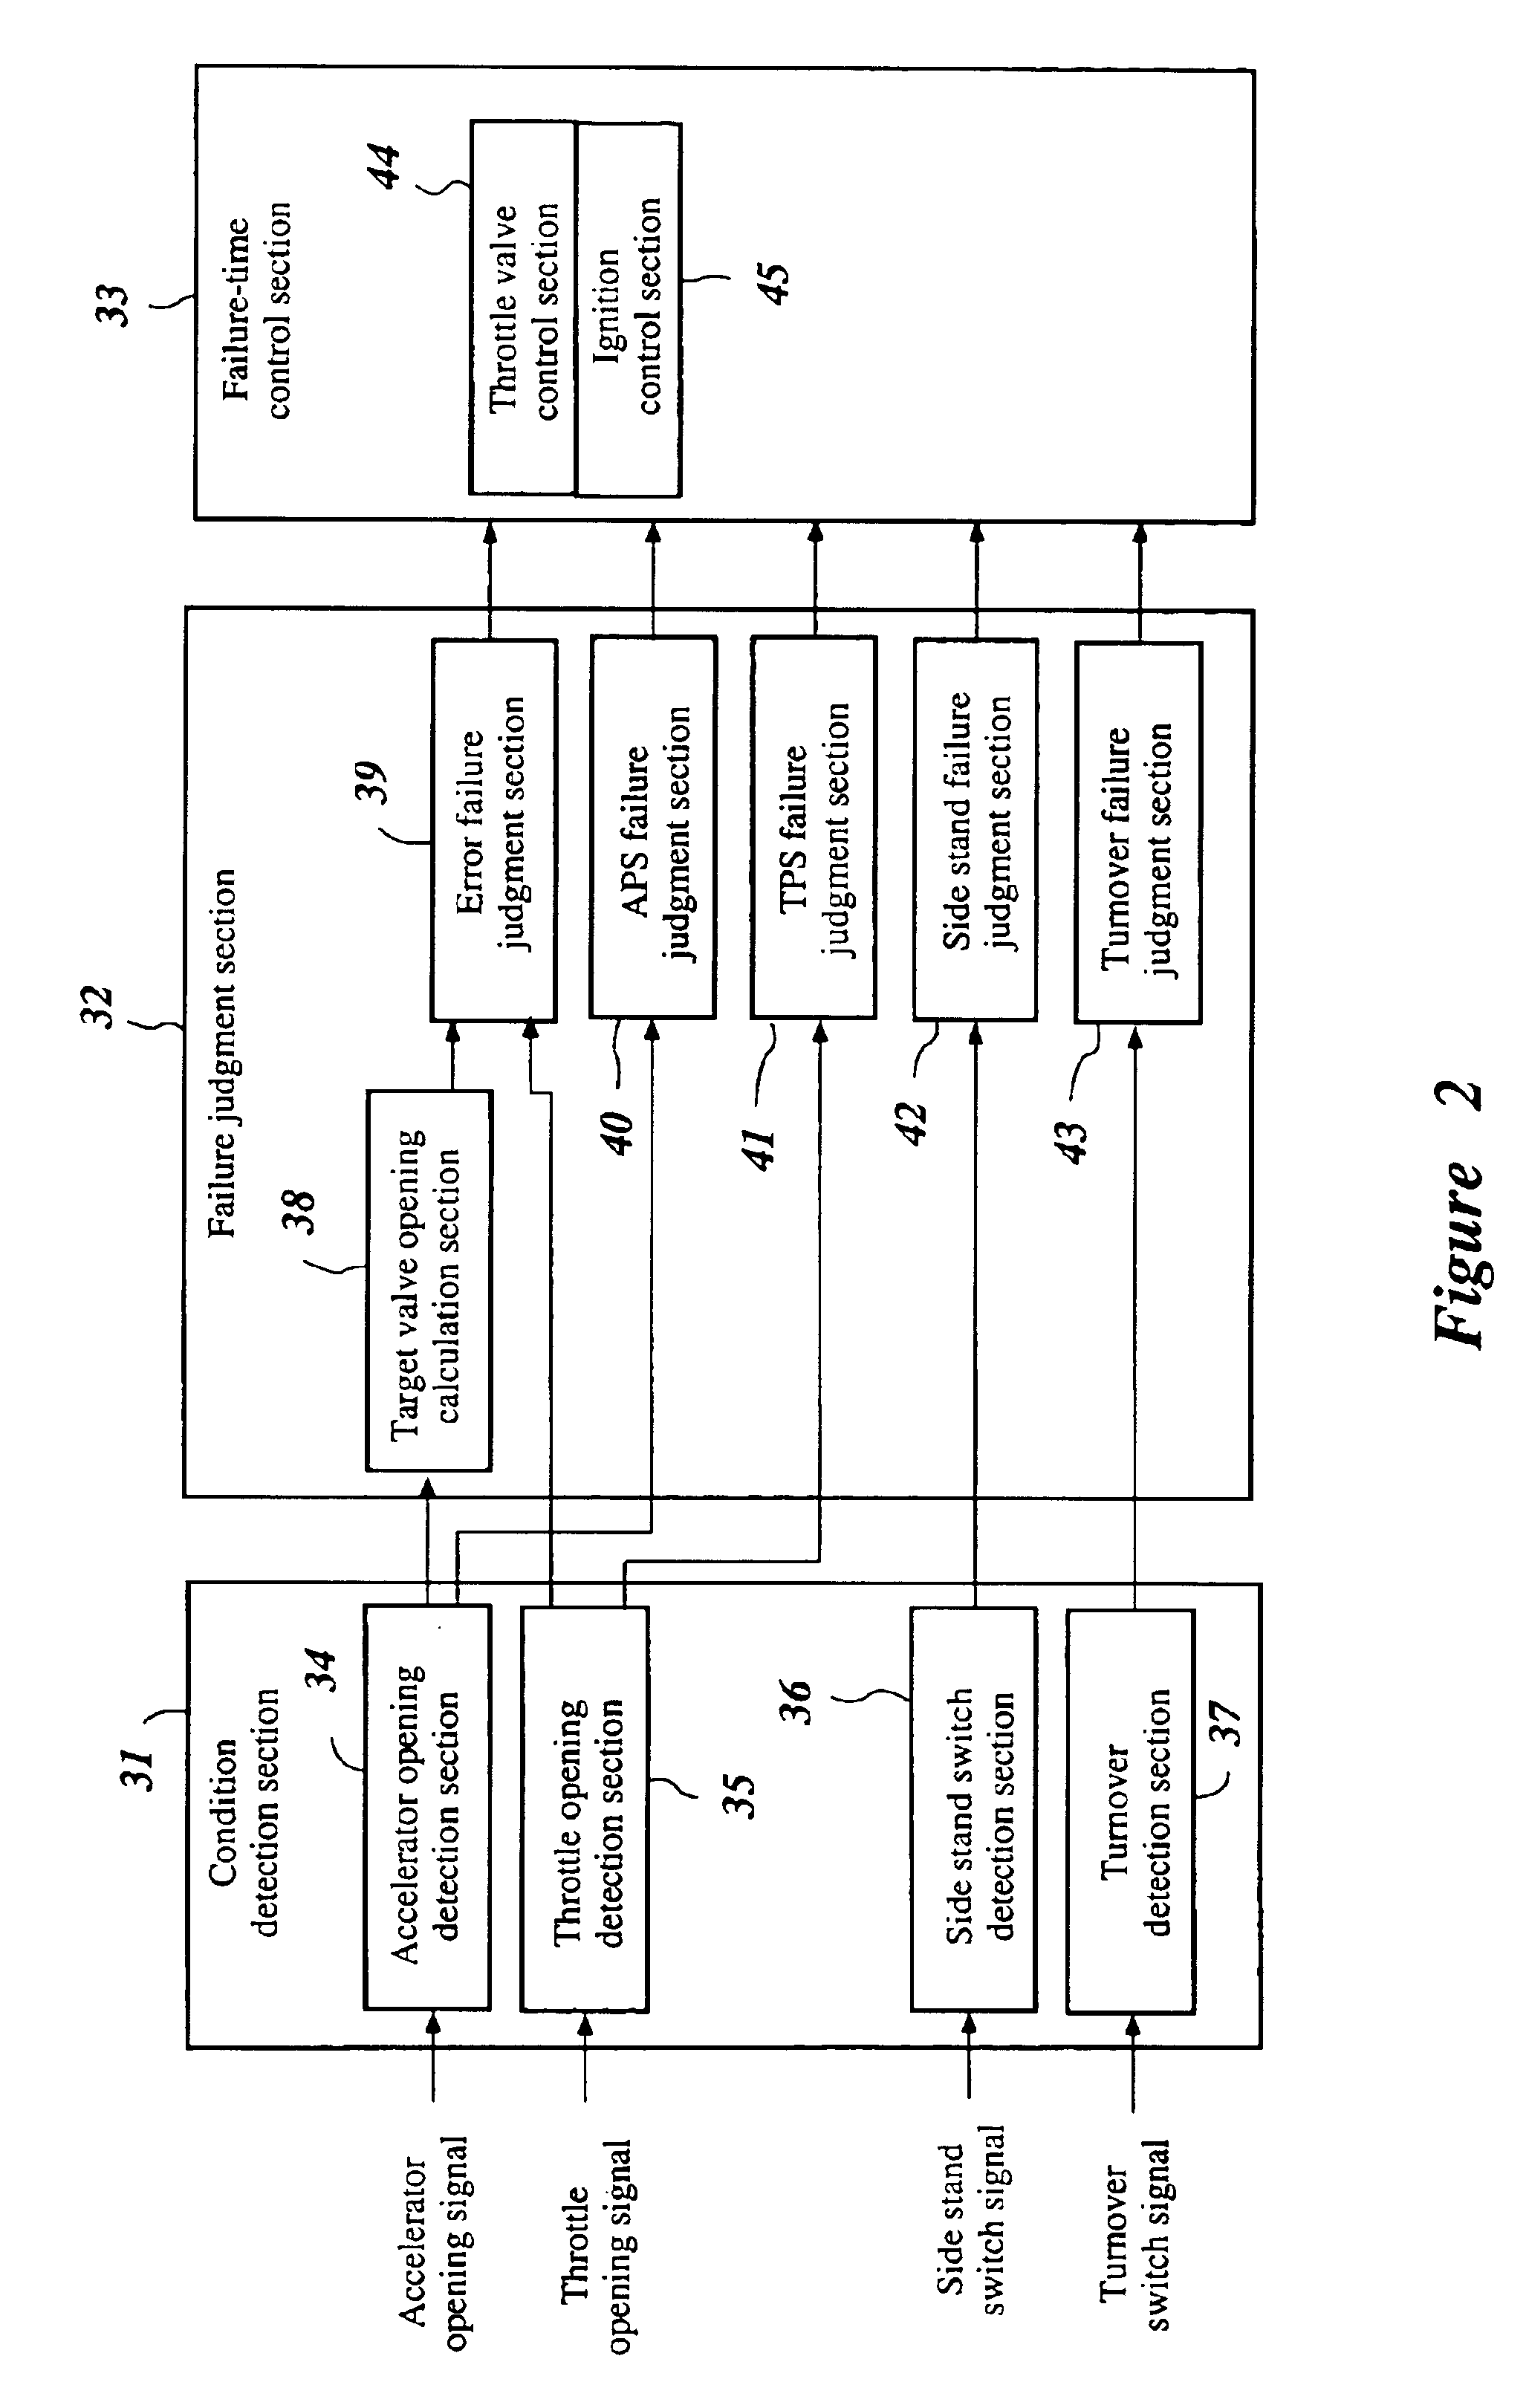 Electronic engine control device